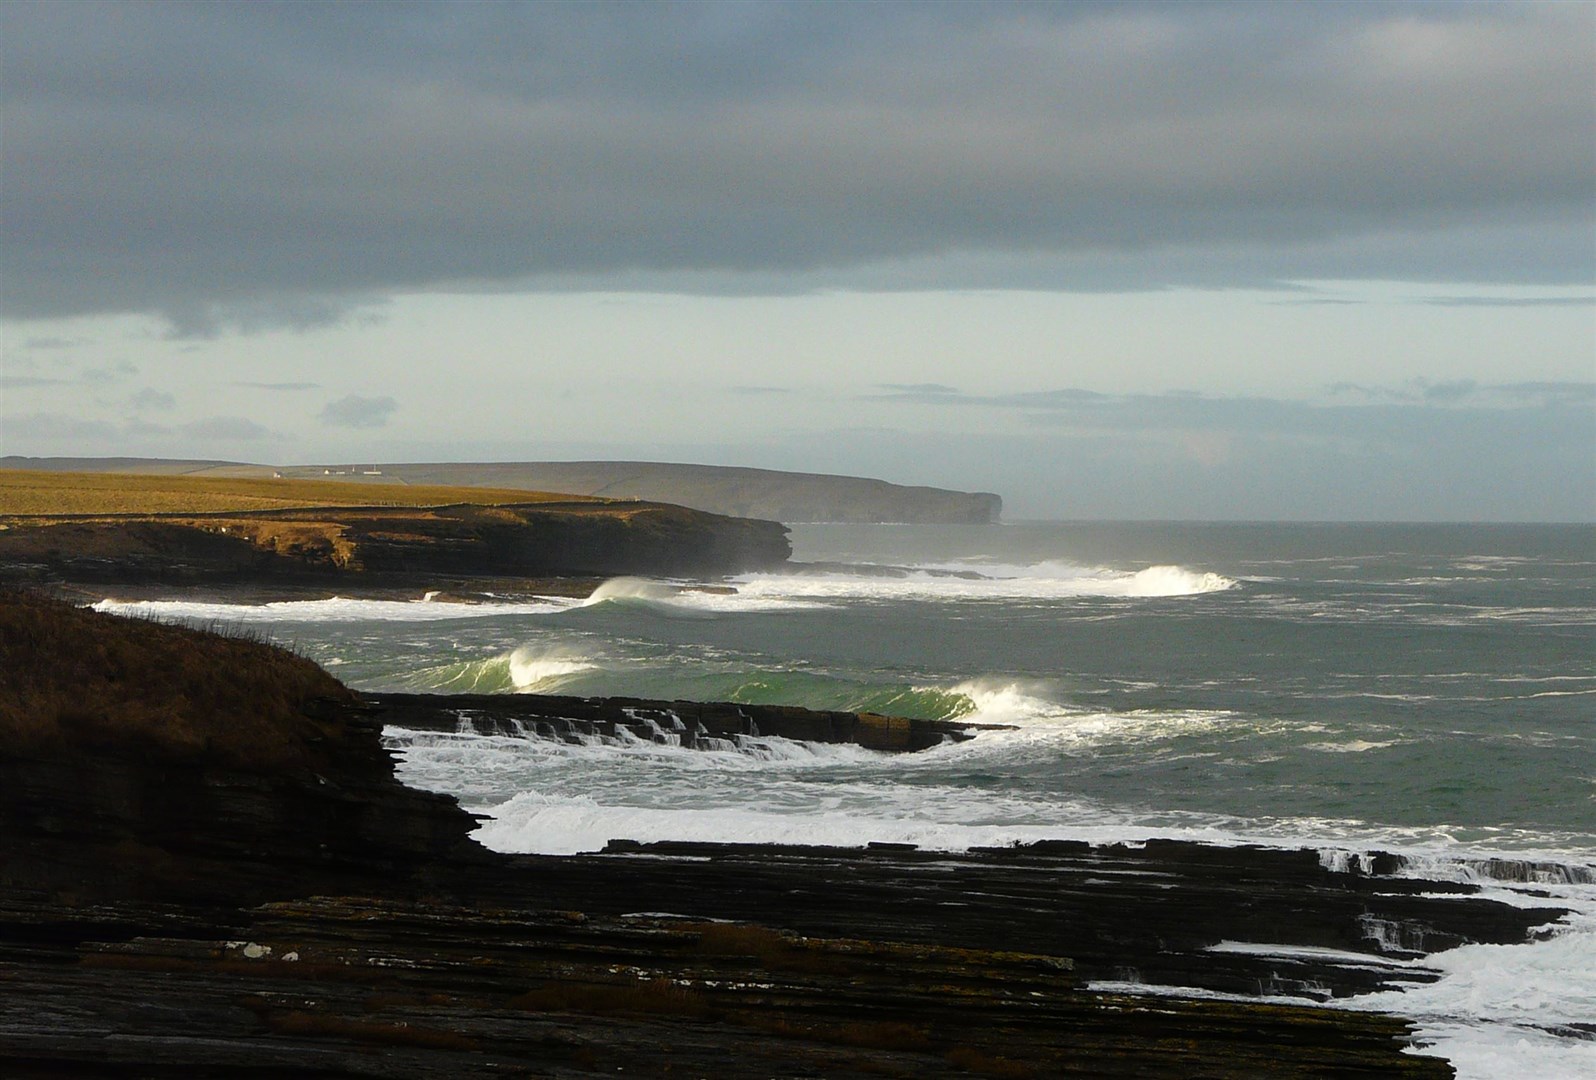 The body was found at the foot of cliffs at Thurso East.